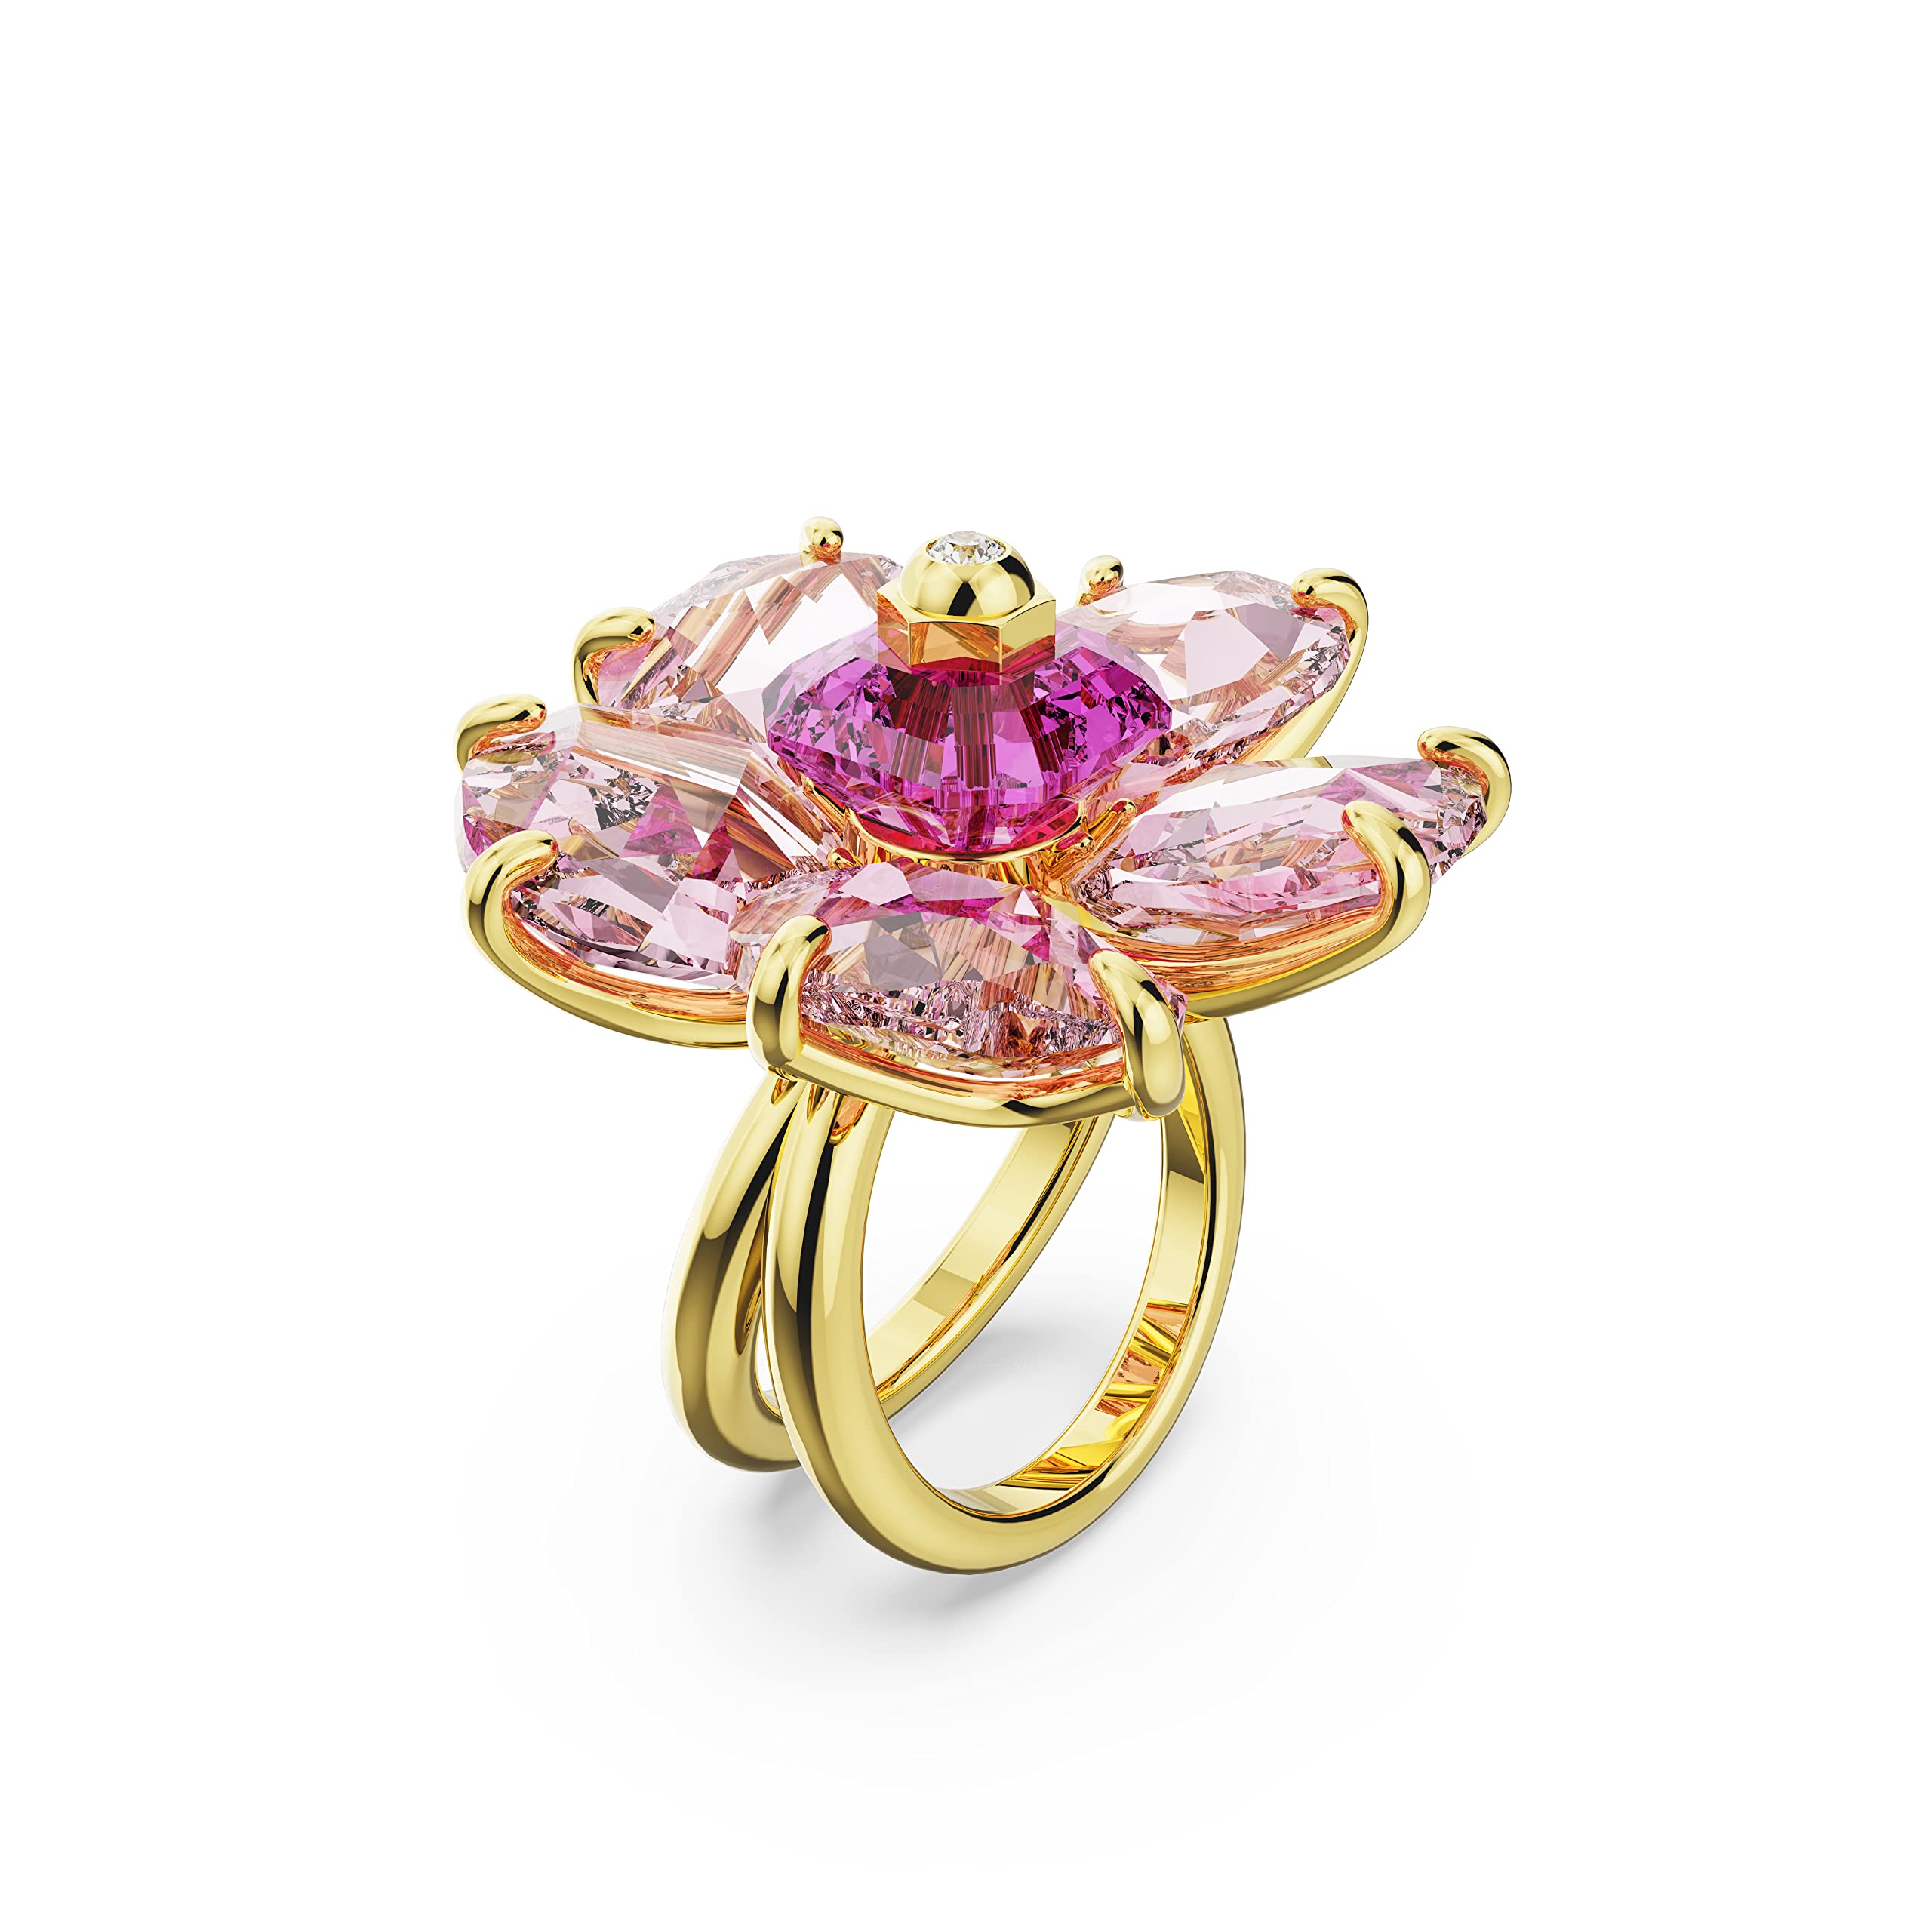 SWAROVSKI Florere Cocktail Ring, Flower Motif with Pink Crystals on a Gold-Tone Finished Double Band, Size 5, Part of the Florere Collection